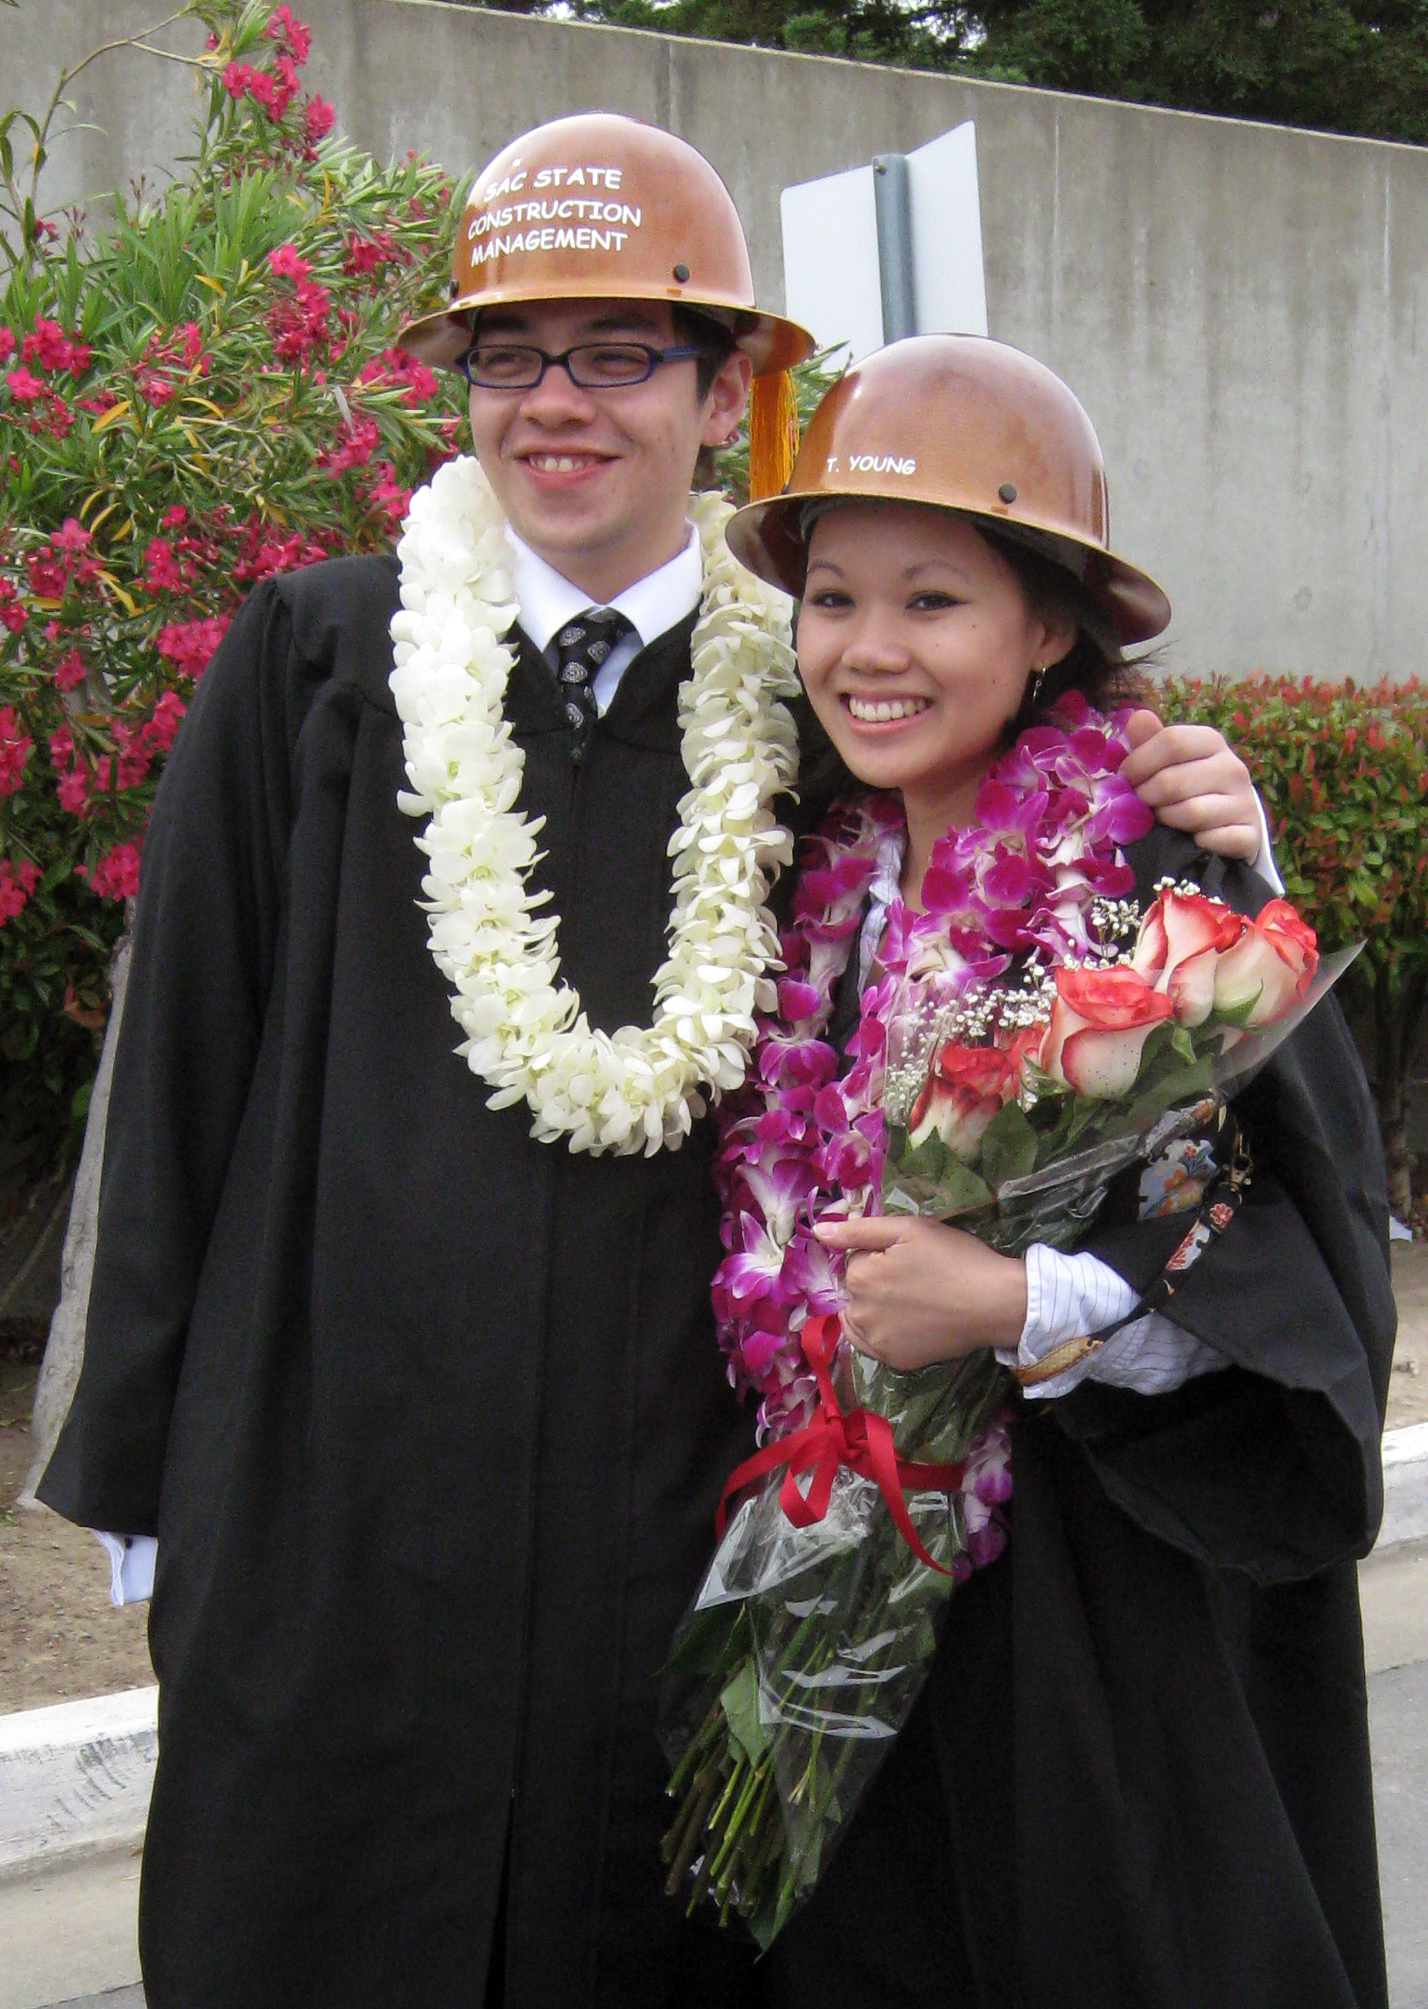 Ryan Sutton-Gee and Tracy Young wearing academic regalia at their graduation from Sac State.